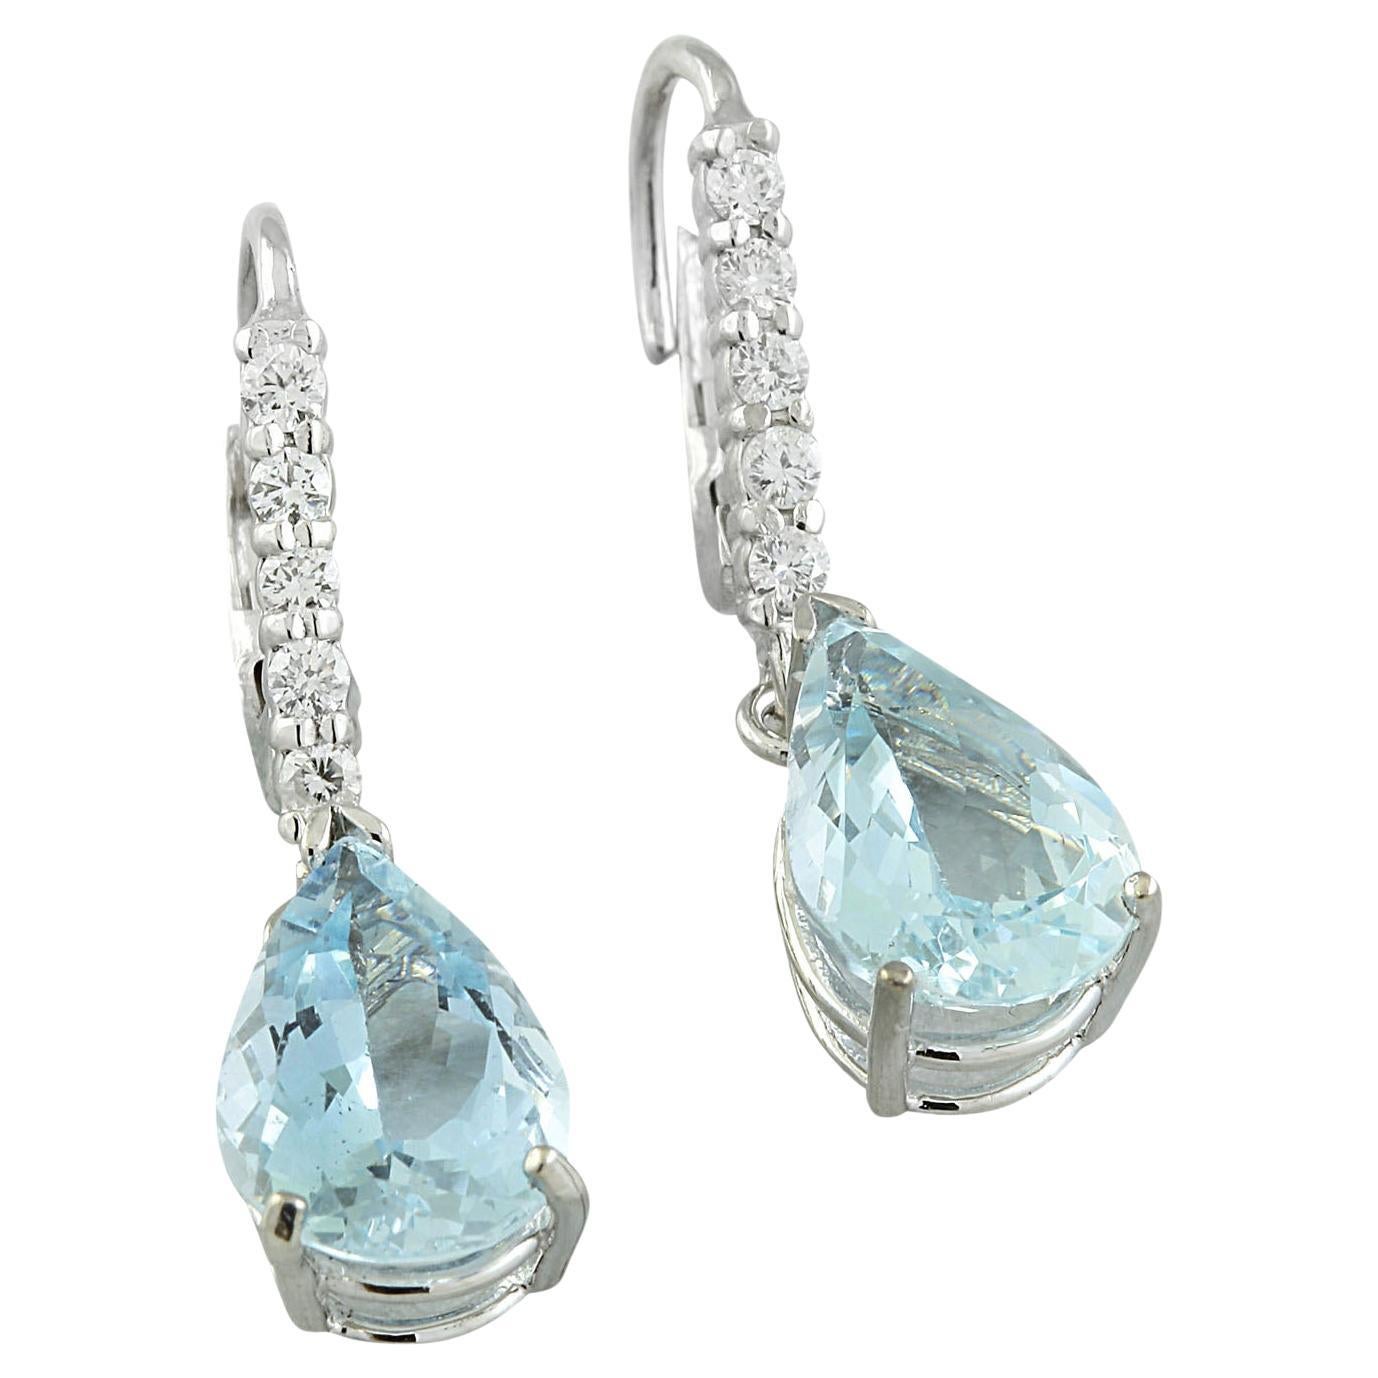 6.45 Carat Natural Aquamarine 14 Karat Solid White Gold Diamond Earrings
Stamped: 14K 
Total Earrings Weight: 3.9 Grams 
Aquamarine  Weight: 6.00 Carat (12.00x7.00 Millimeters)  
Quantity: 2
Diamond Weight: 0.45 Carat (F-G Color, VS2-SI1 Clarity